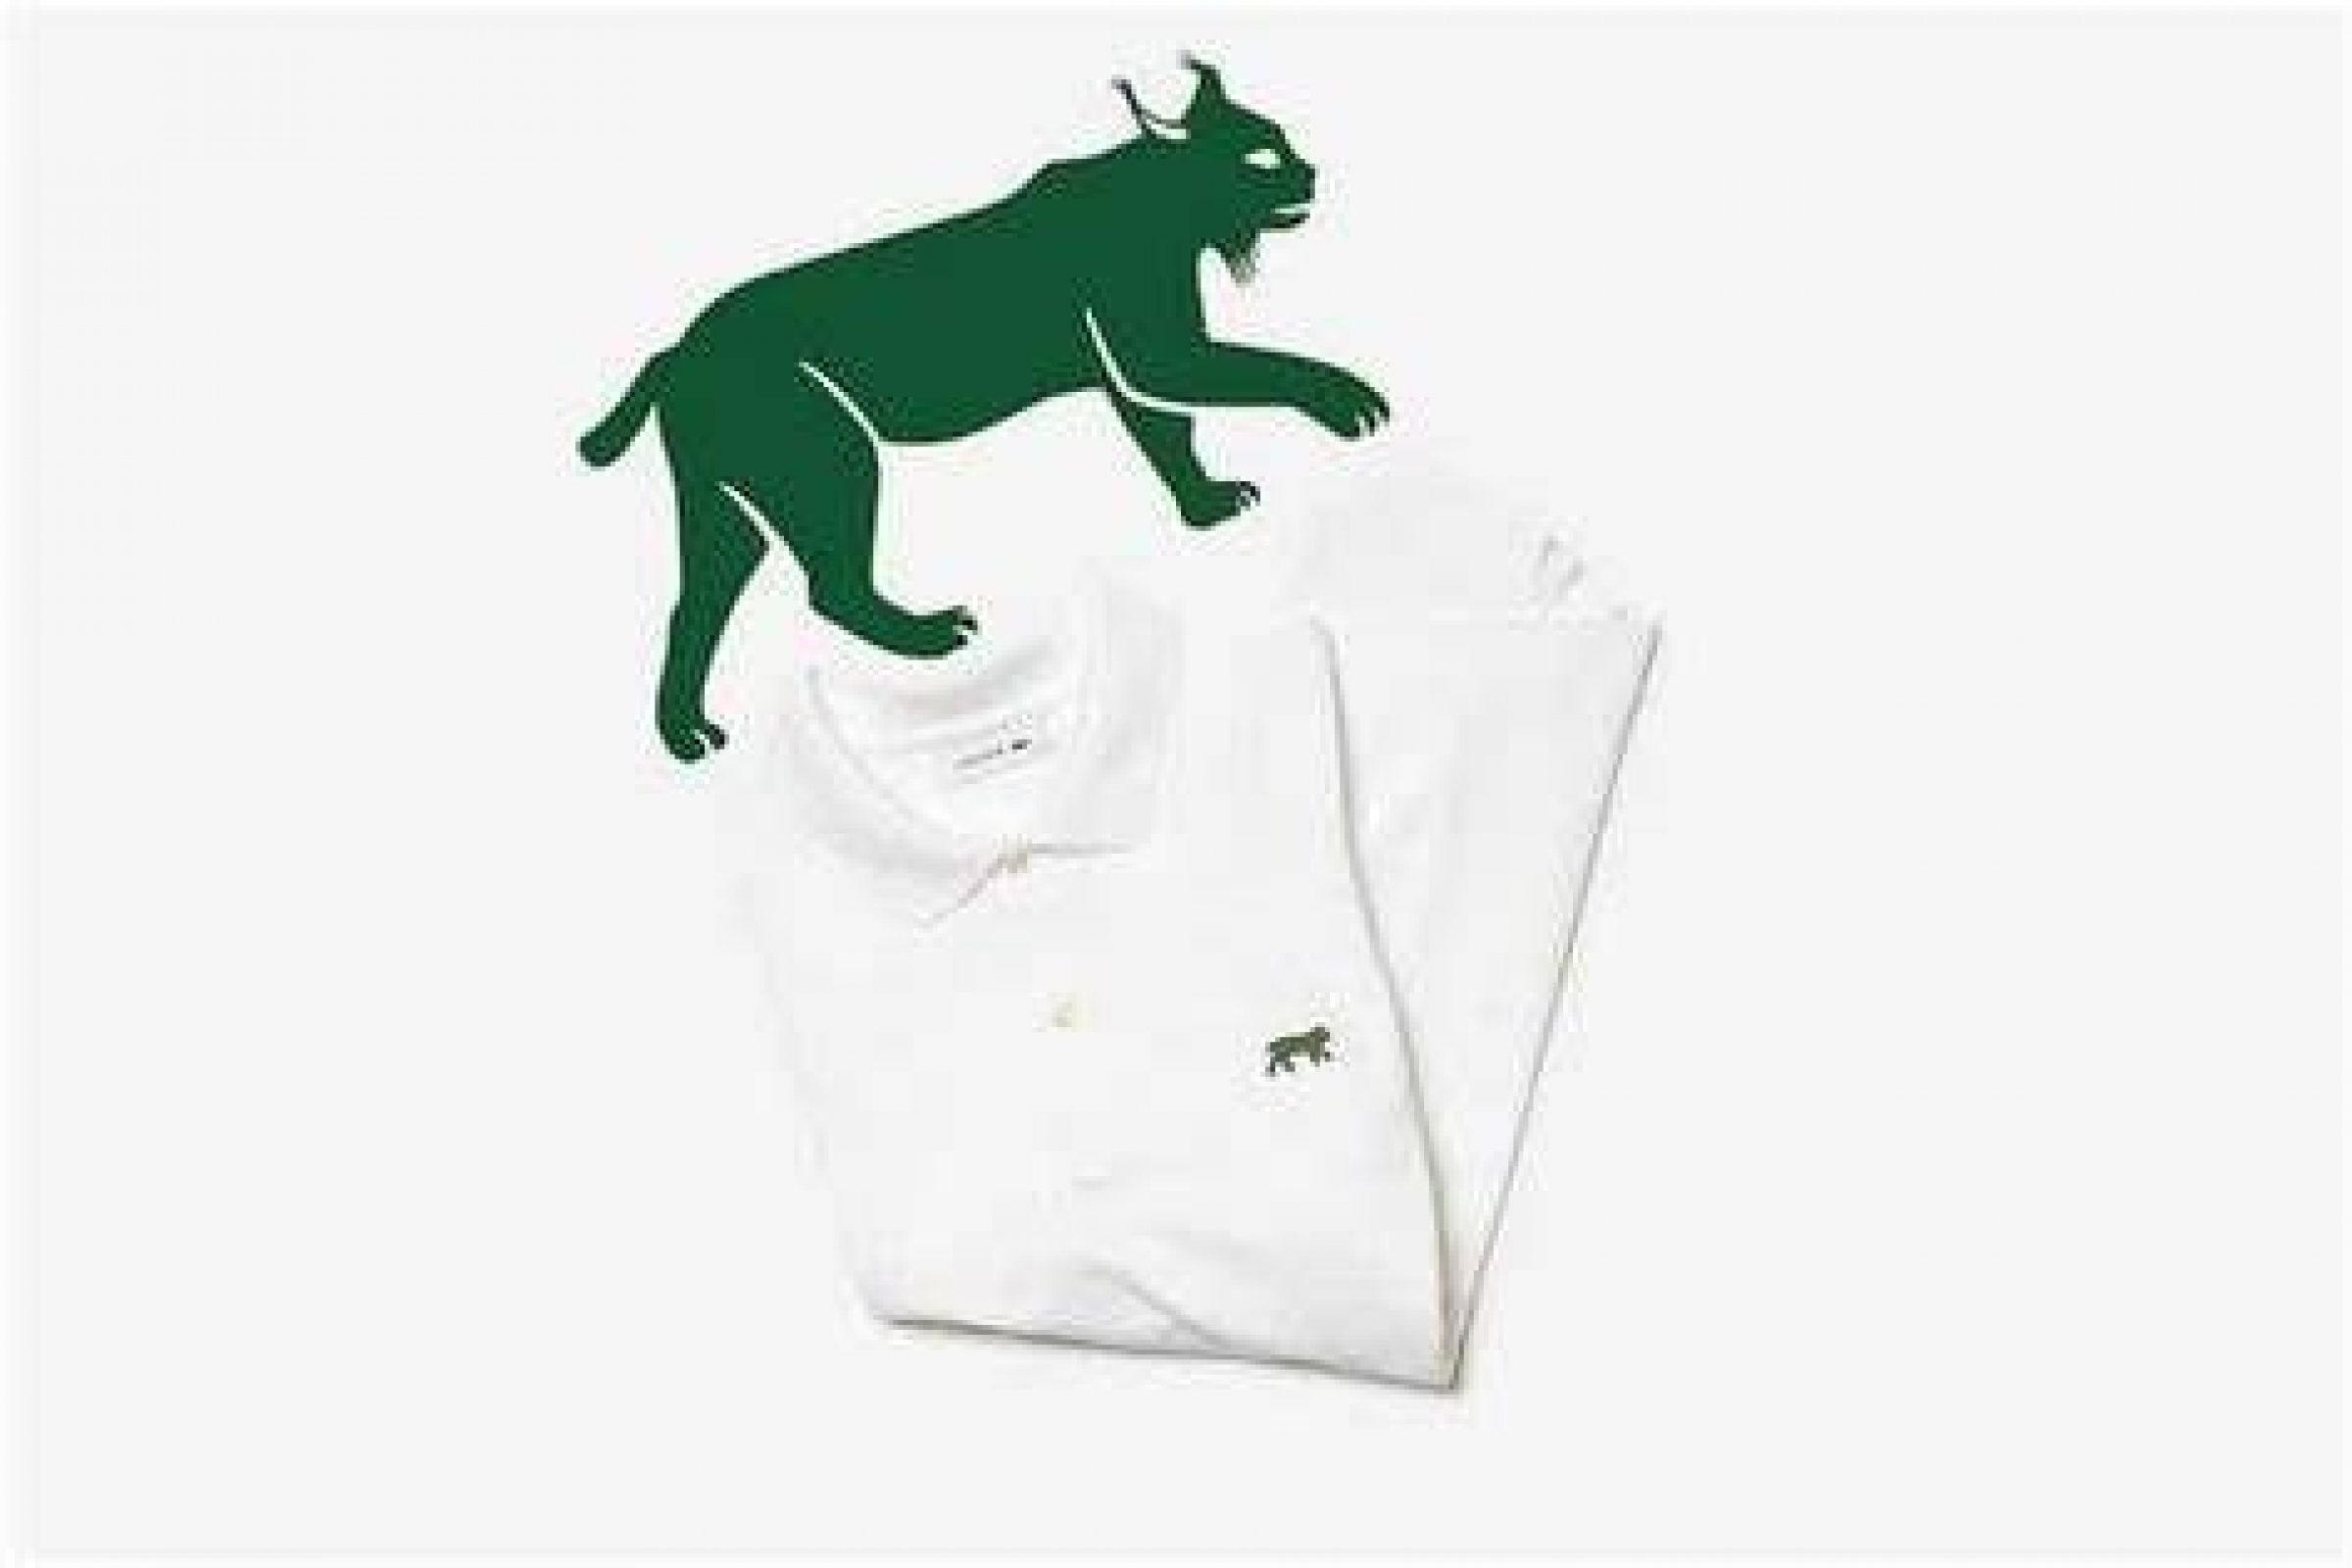 lacoste limited edition endangered species